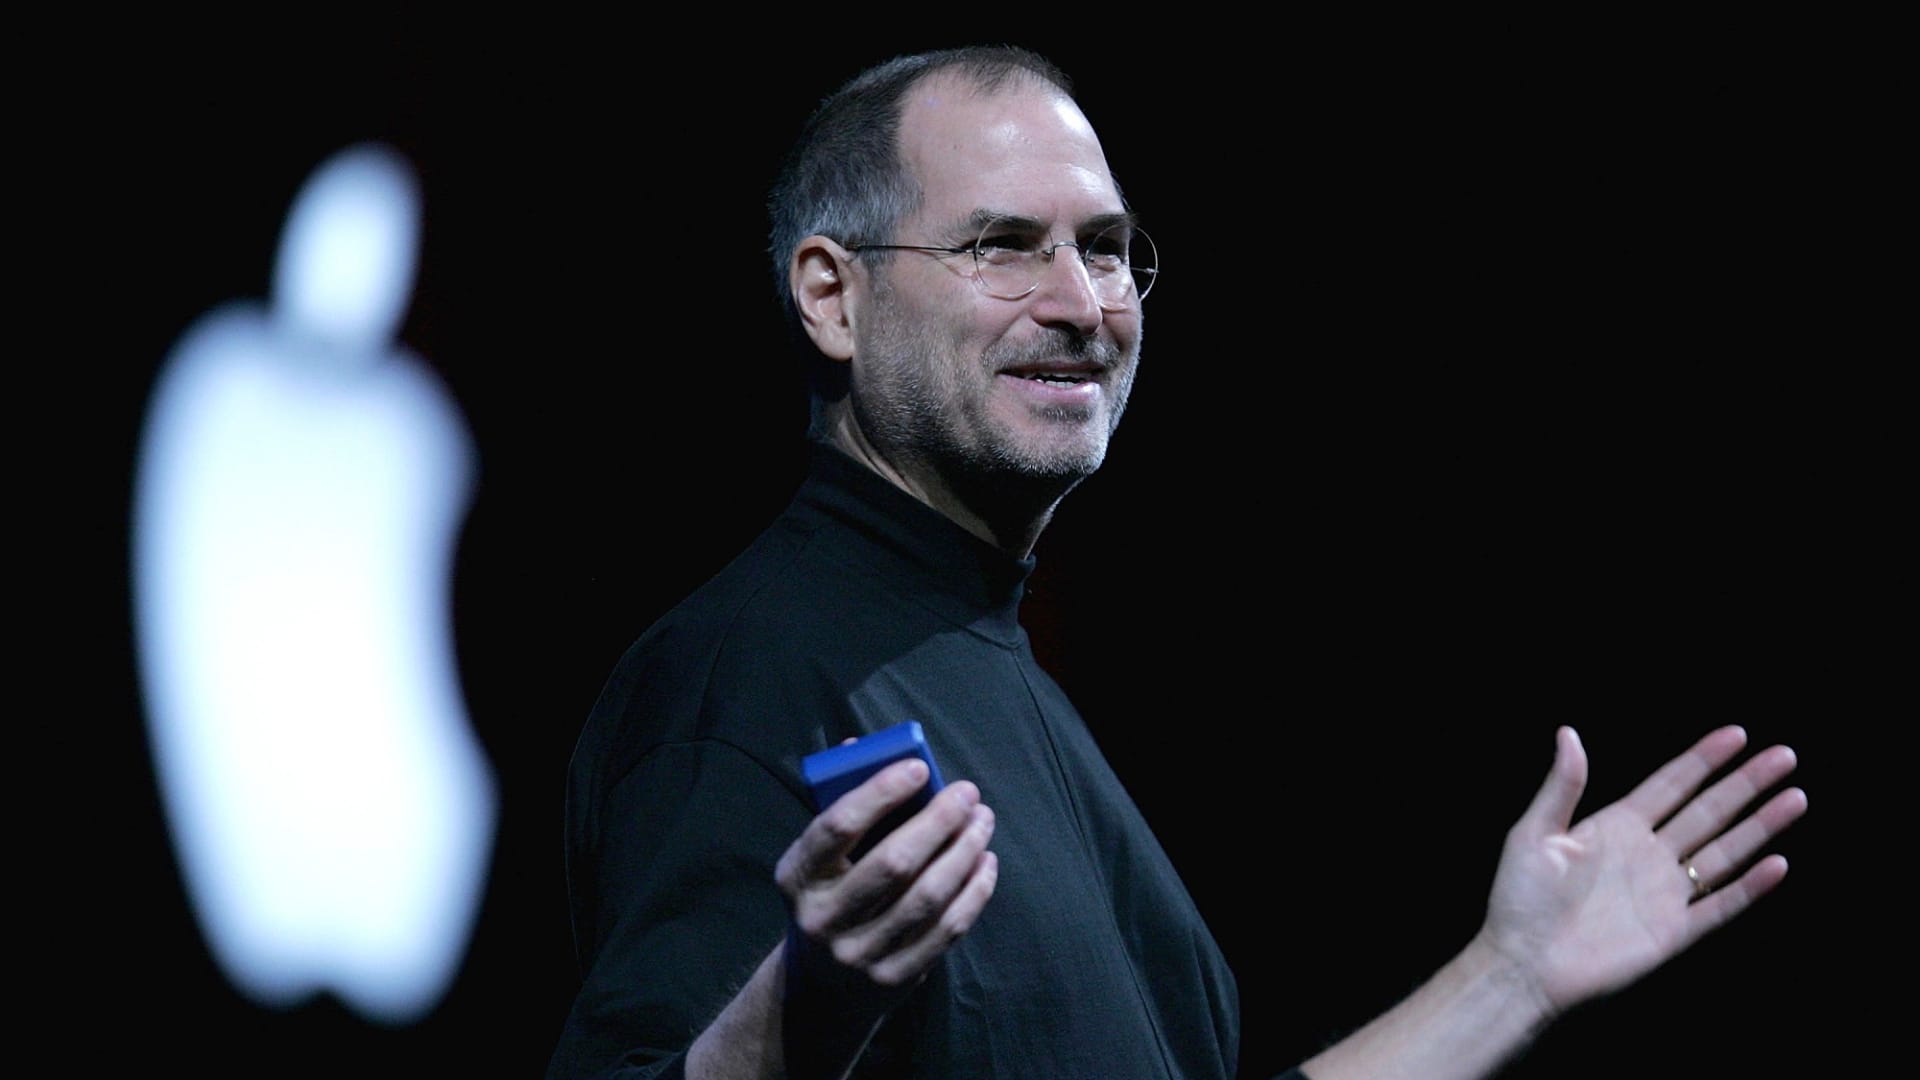 The iConic Bibliophile: Steve Jobs’ Book Recommendations